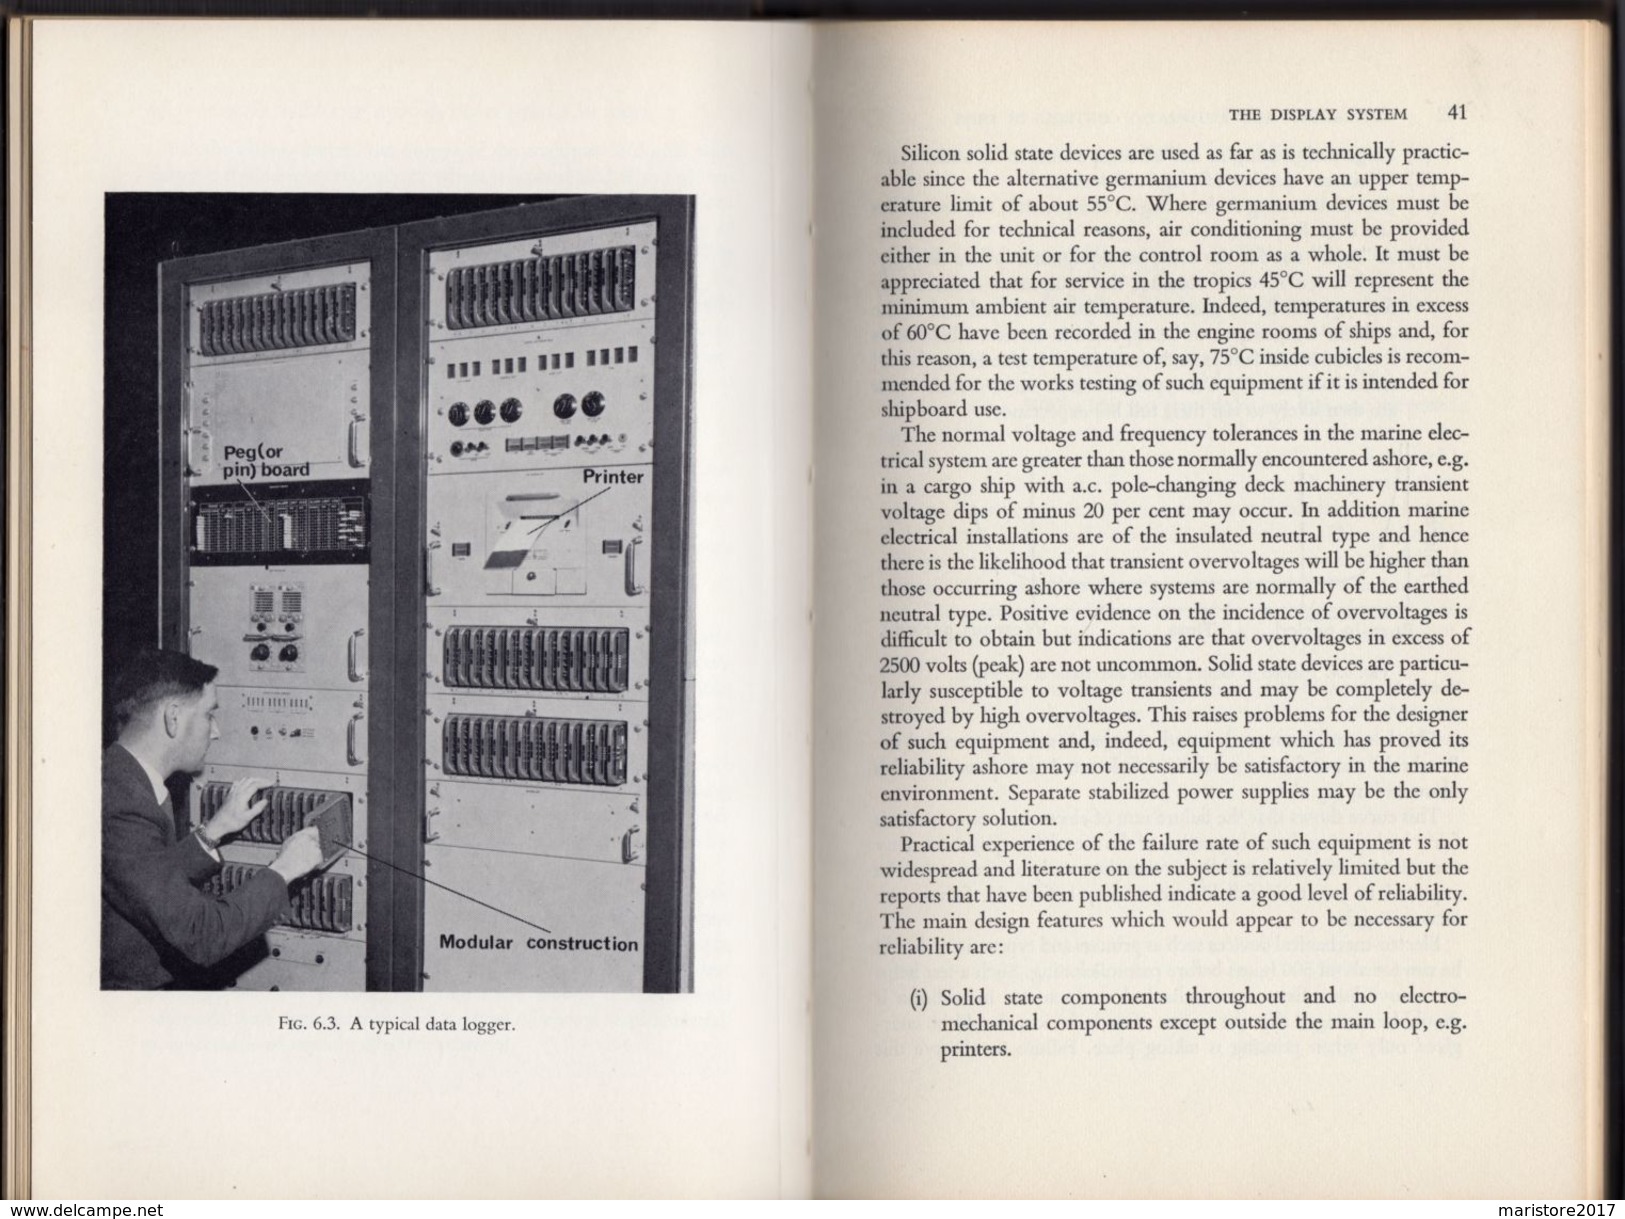 Vintage Technology Book Libro Ingegneria Navale-Centralized And Automatic Controls In Ships - 1st Edition-1966 - Ingeniería